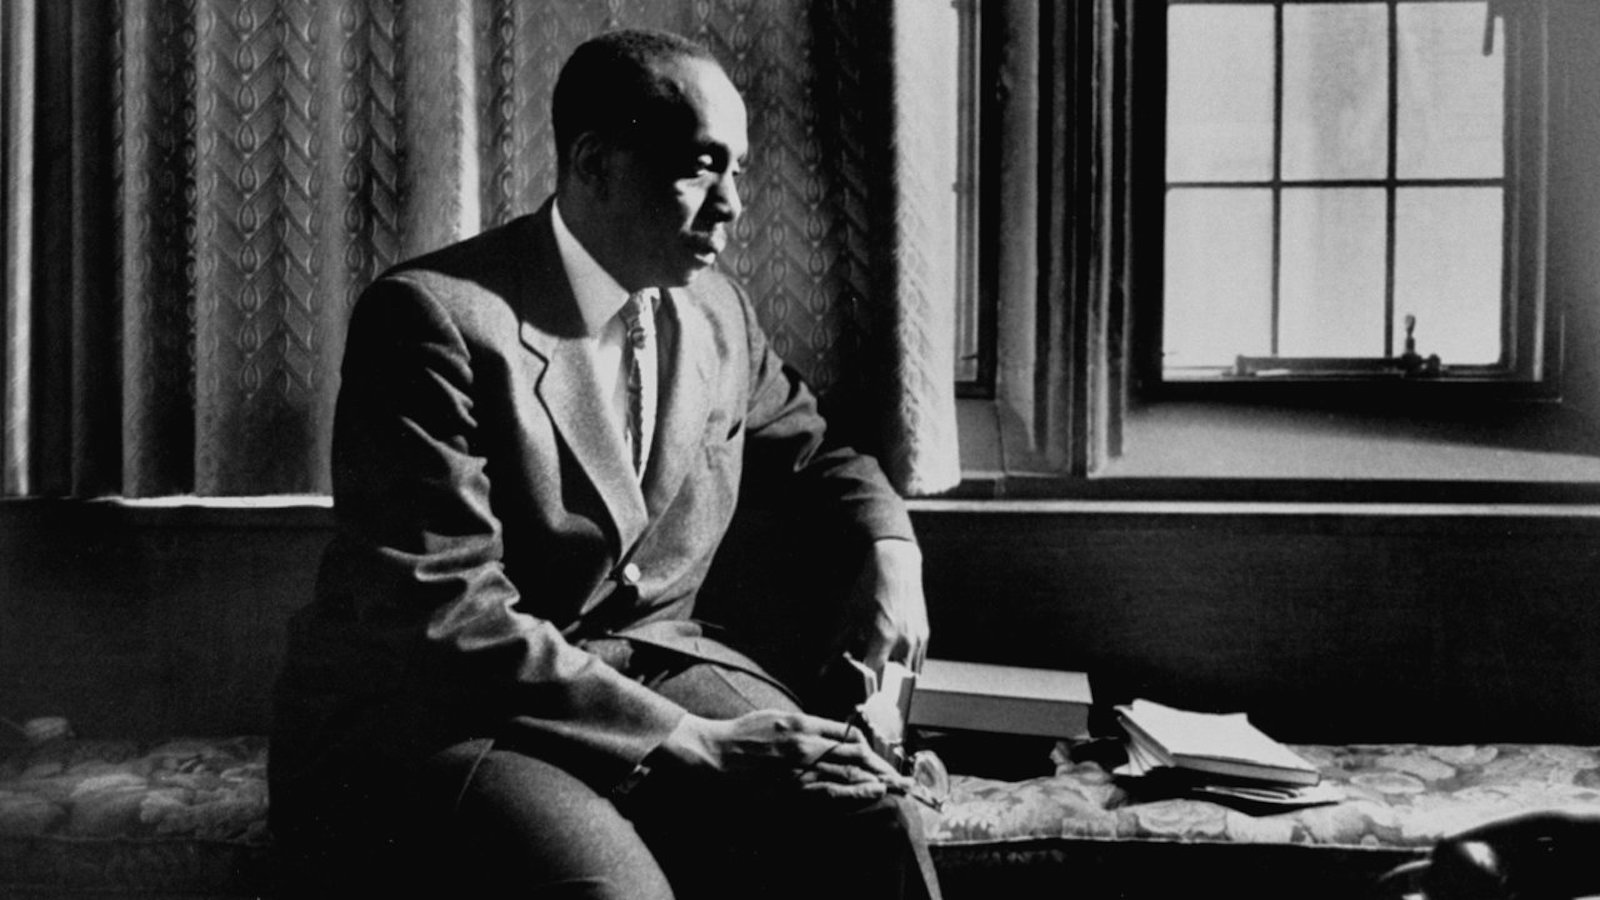 Meet the theologian who helped MLK see the value of nonviolence | The Conversation